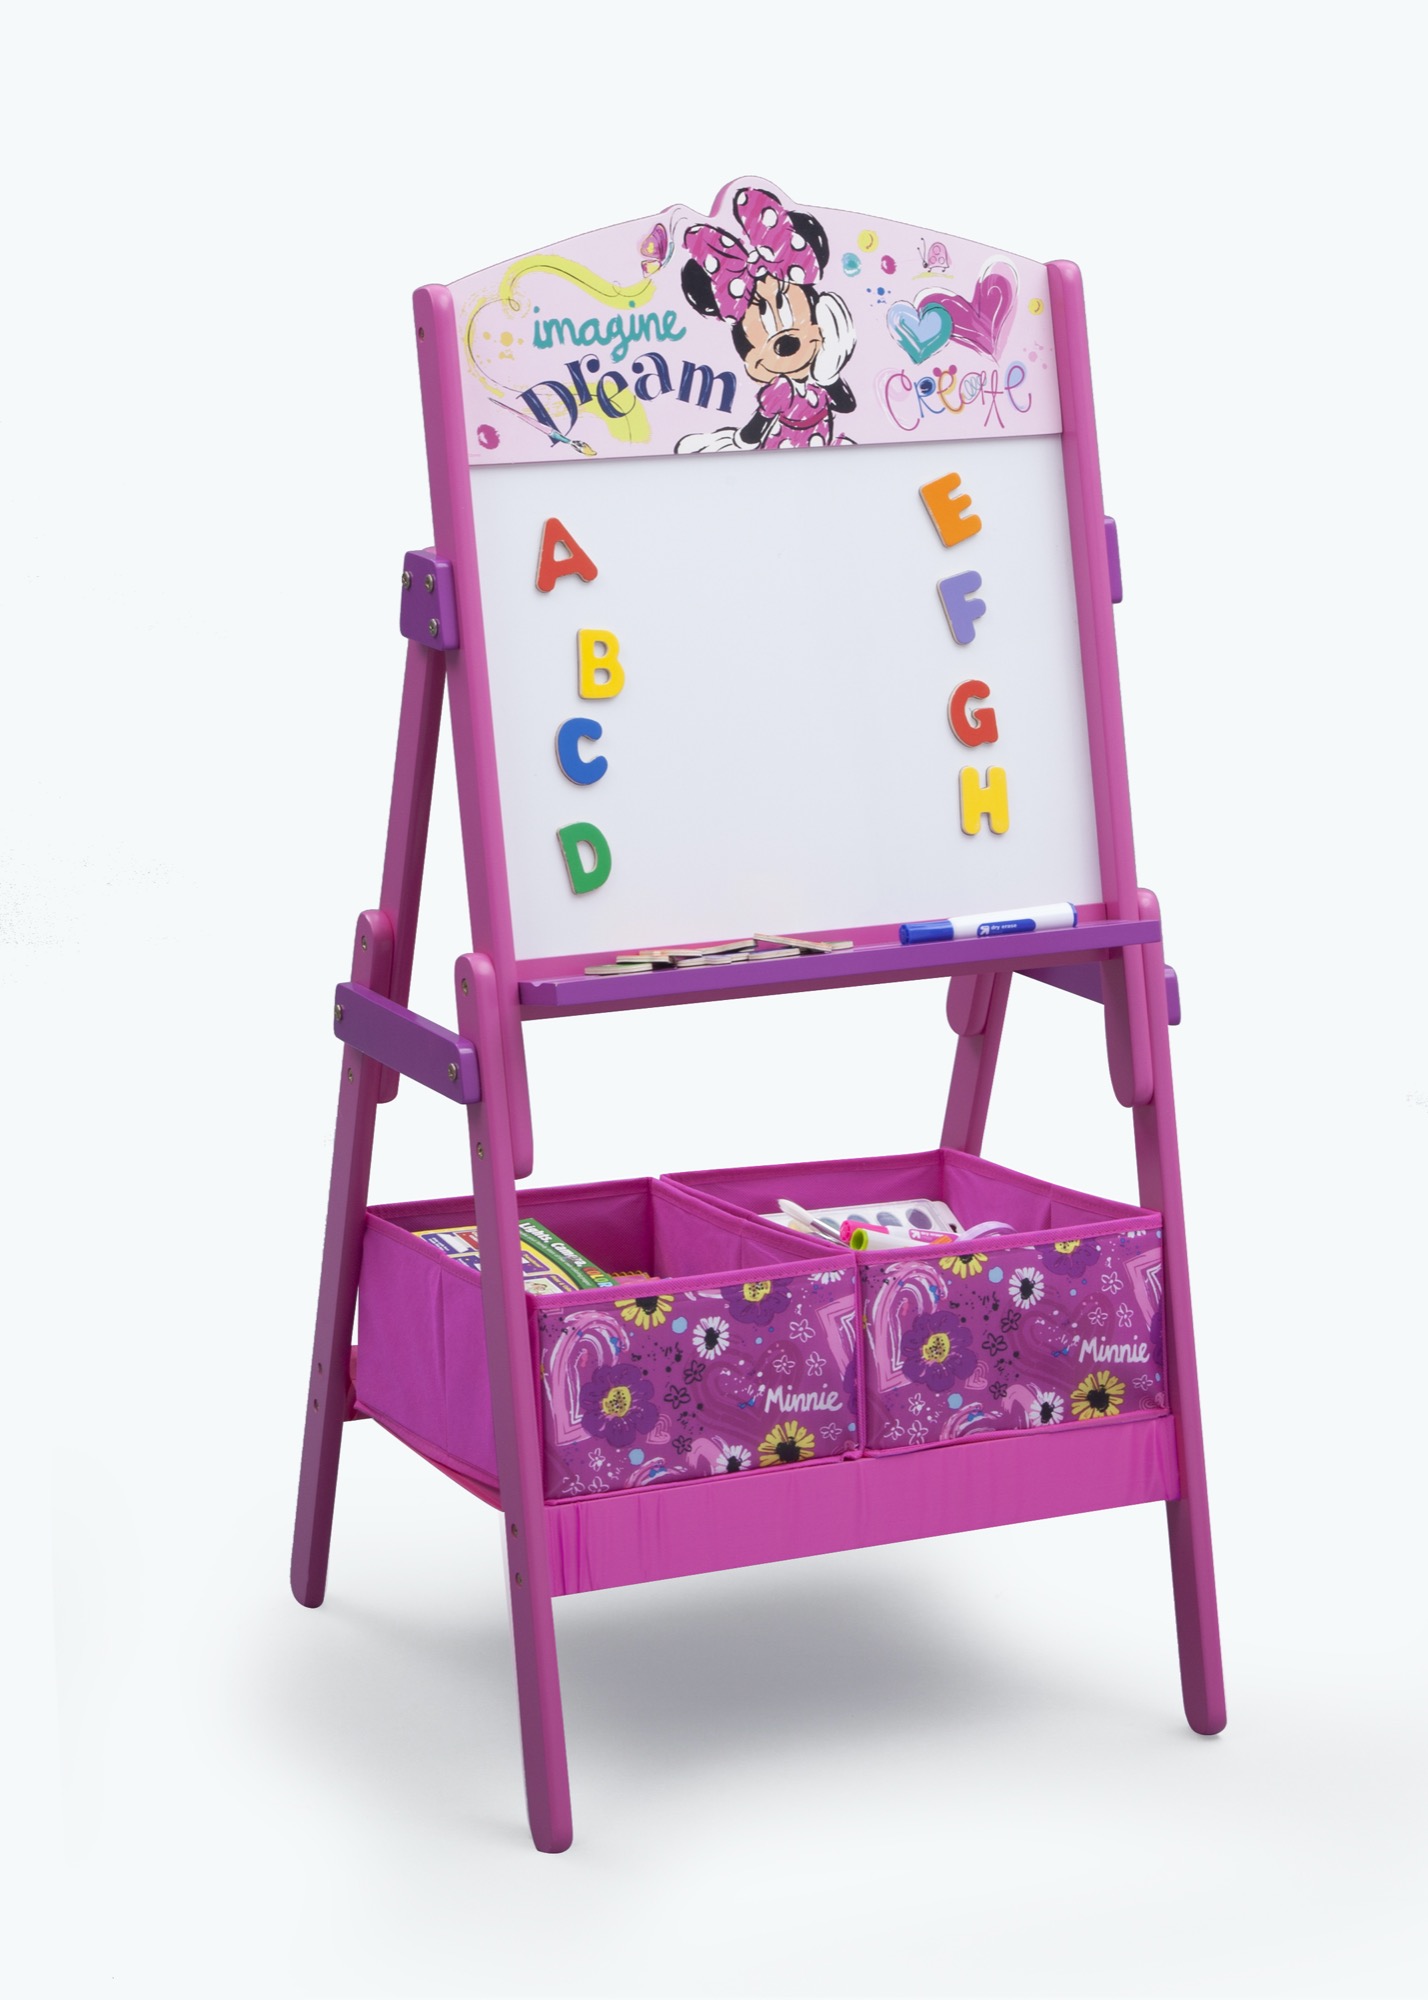 Disney Minnie Mouse Activity Easel with Storage by Delta Children, Greenguard Gold Certified - image 1 of 8